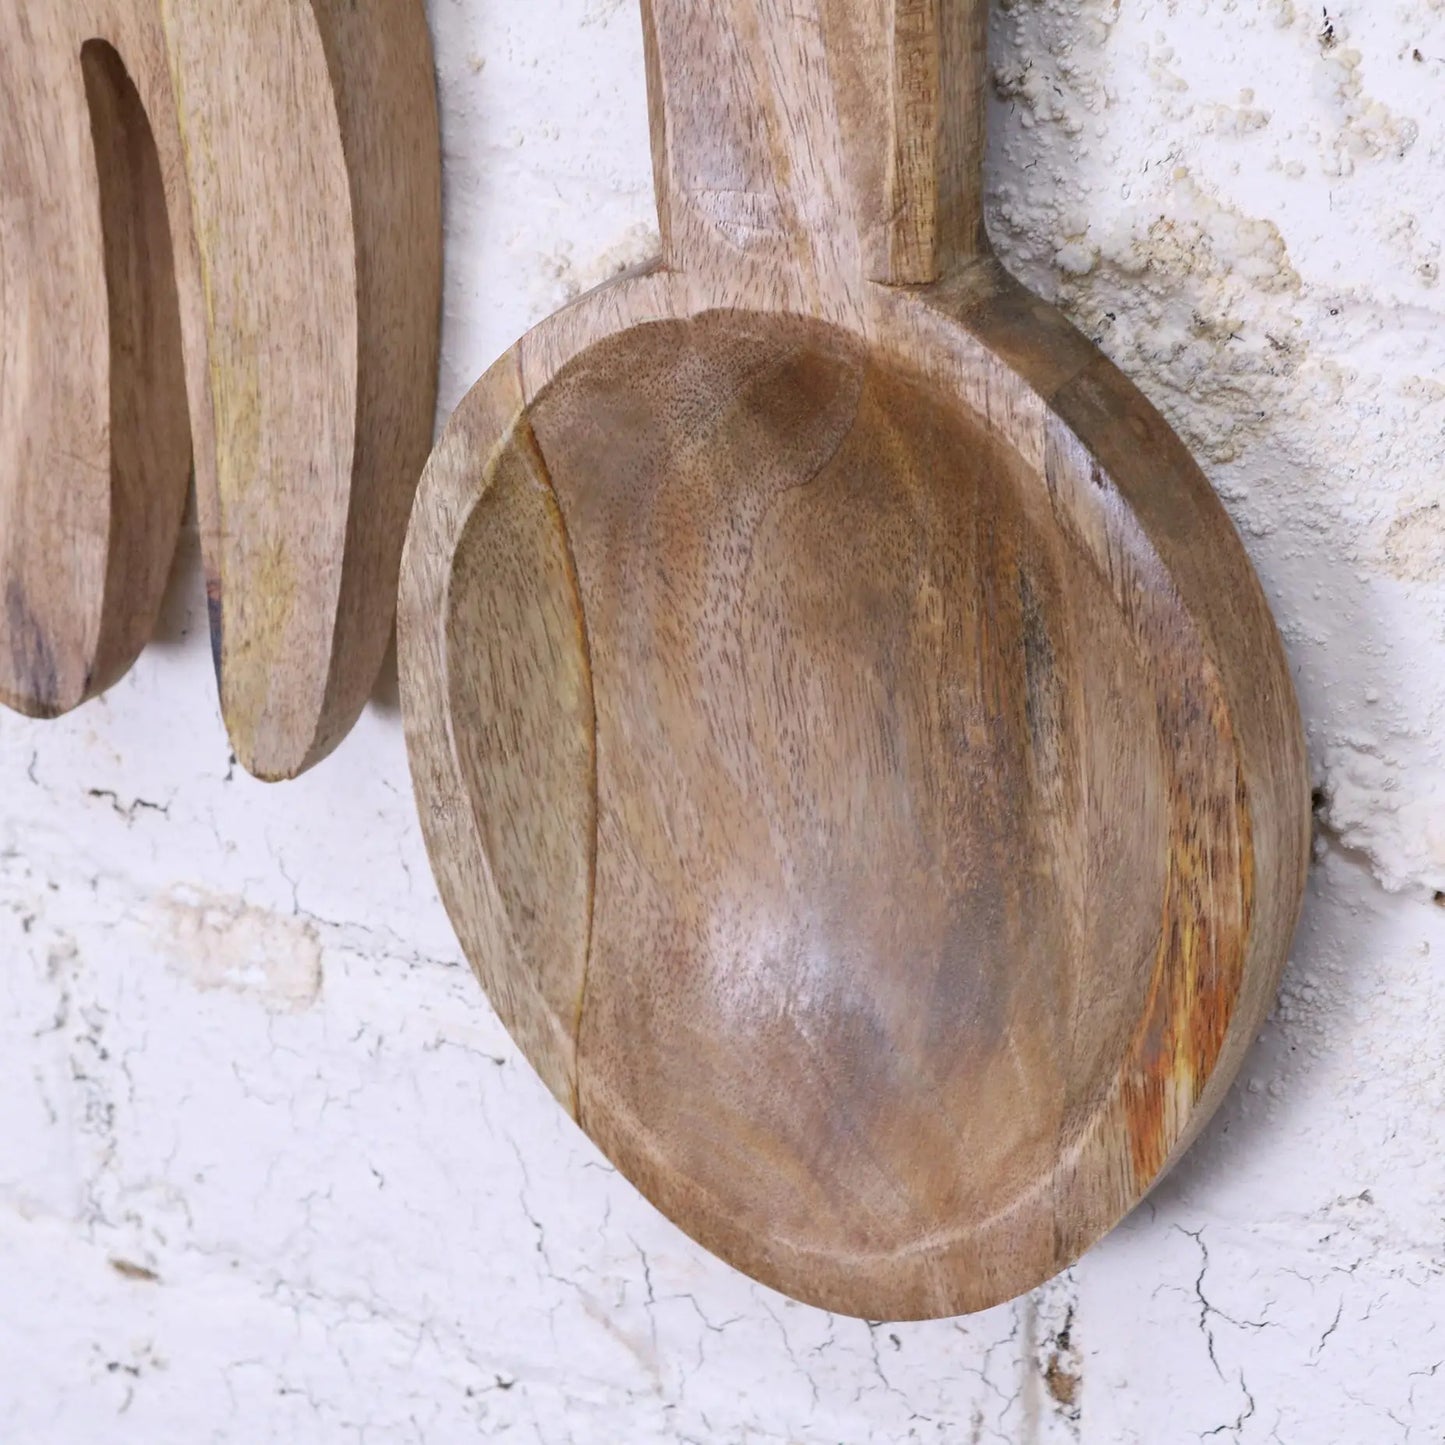 Mawbri Wooden Display Kitchen Giant Cutlery Spoon Fork and Knife - Closeup of Spoon 2